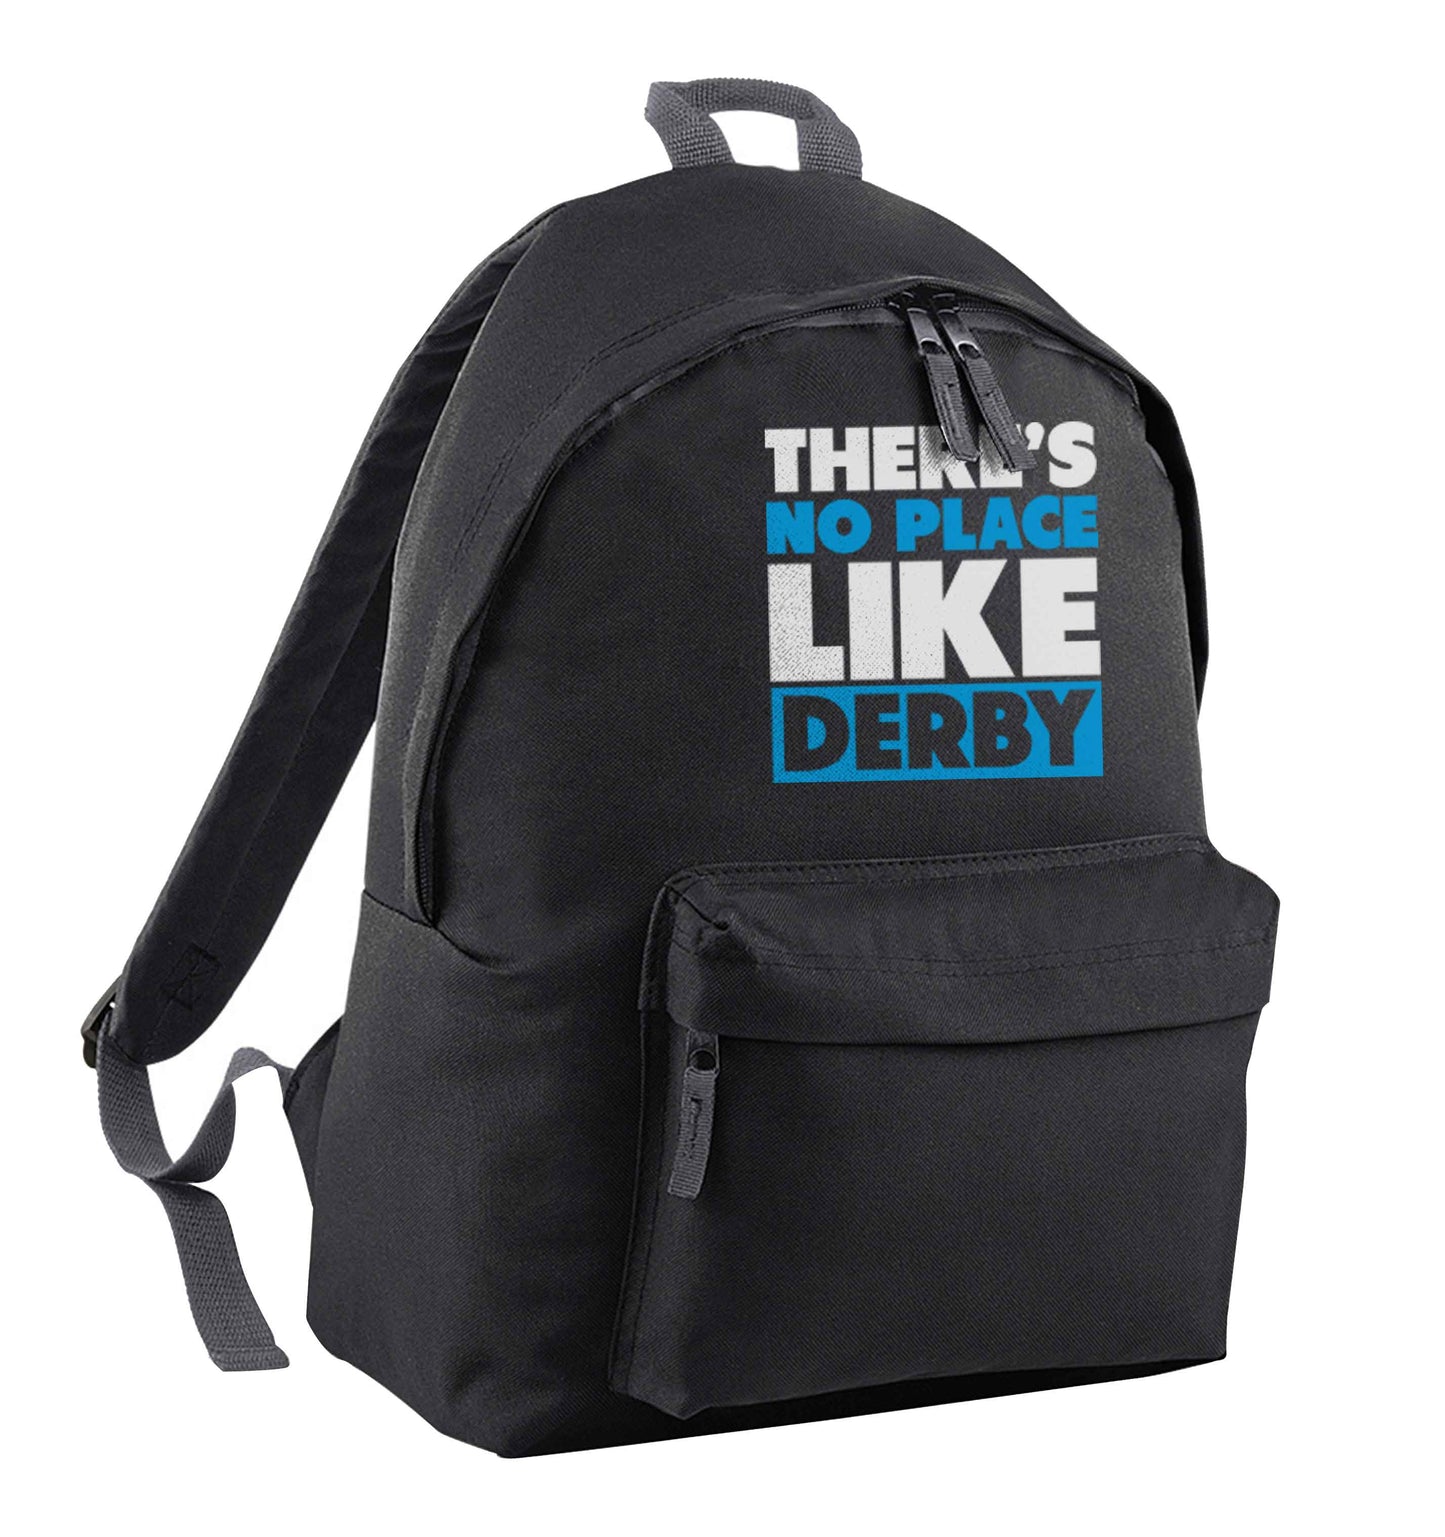 There's no place like Derby black adults backpack